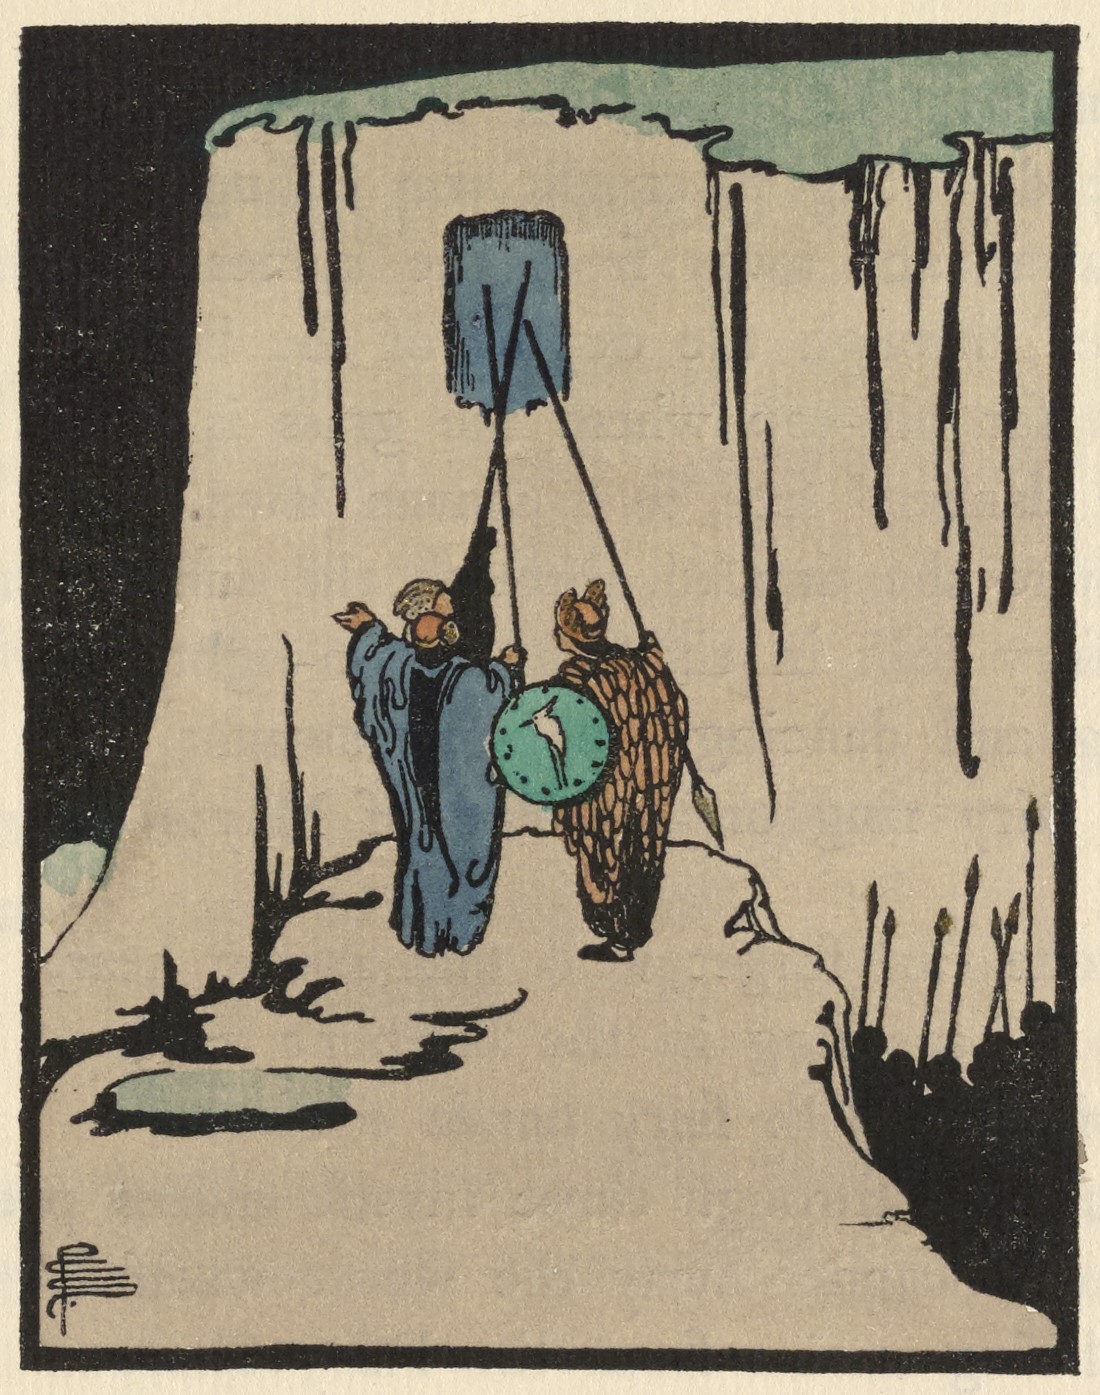 This half-page illustration interrupts the text of “Cael and Credhe,” and is centred on the top half of the last (3rd) page of the story, above the text. The black-bordered rectangular image in portrait orientation shows Cael and Finn standing before the locked hill home of the Sidhe, tapping on the blue window with their spears. Both figures have their backs to the viewer, and wear winged helmets; Cael is in blue robes while Finn wears a brown cloak and holds a green shield with a white crane emblazoned on it. They stand on a beige rocky outcrop, a silhouetted army below them. The artist’s monogram is in the bottom left corner of the image.